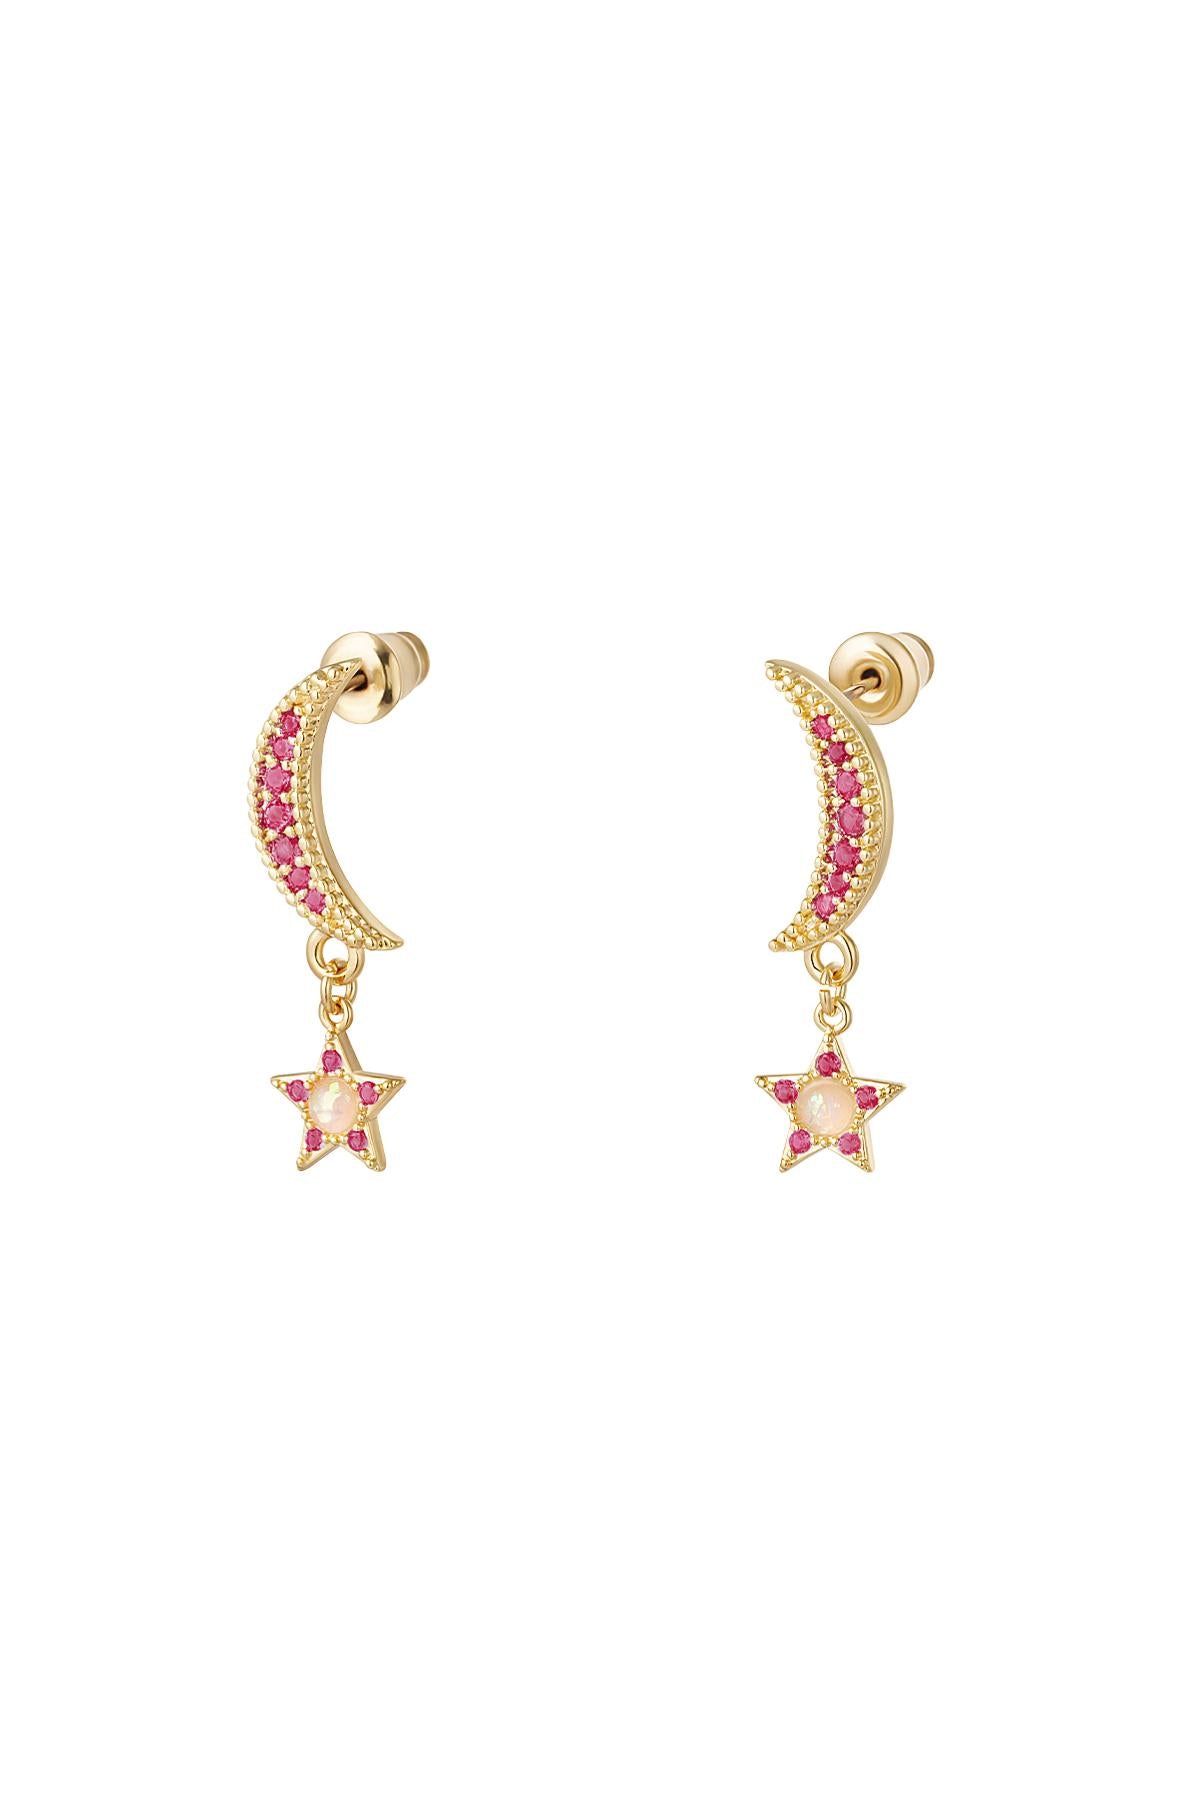 Thunder Egg -  Pink Sparkle Moon Earrings with Drop Star